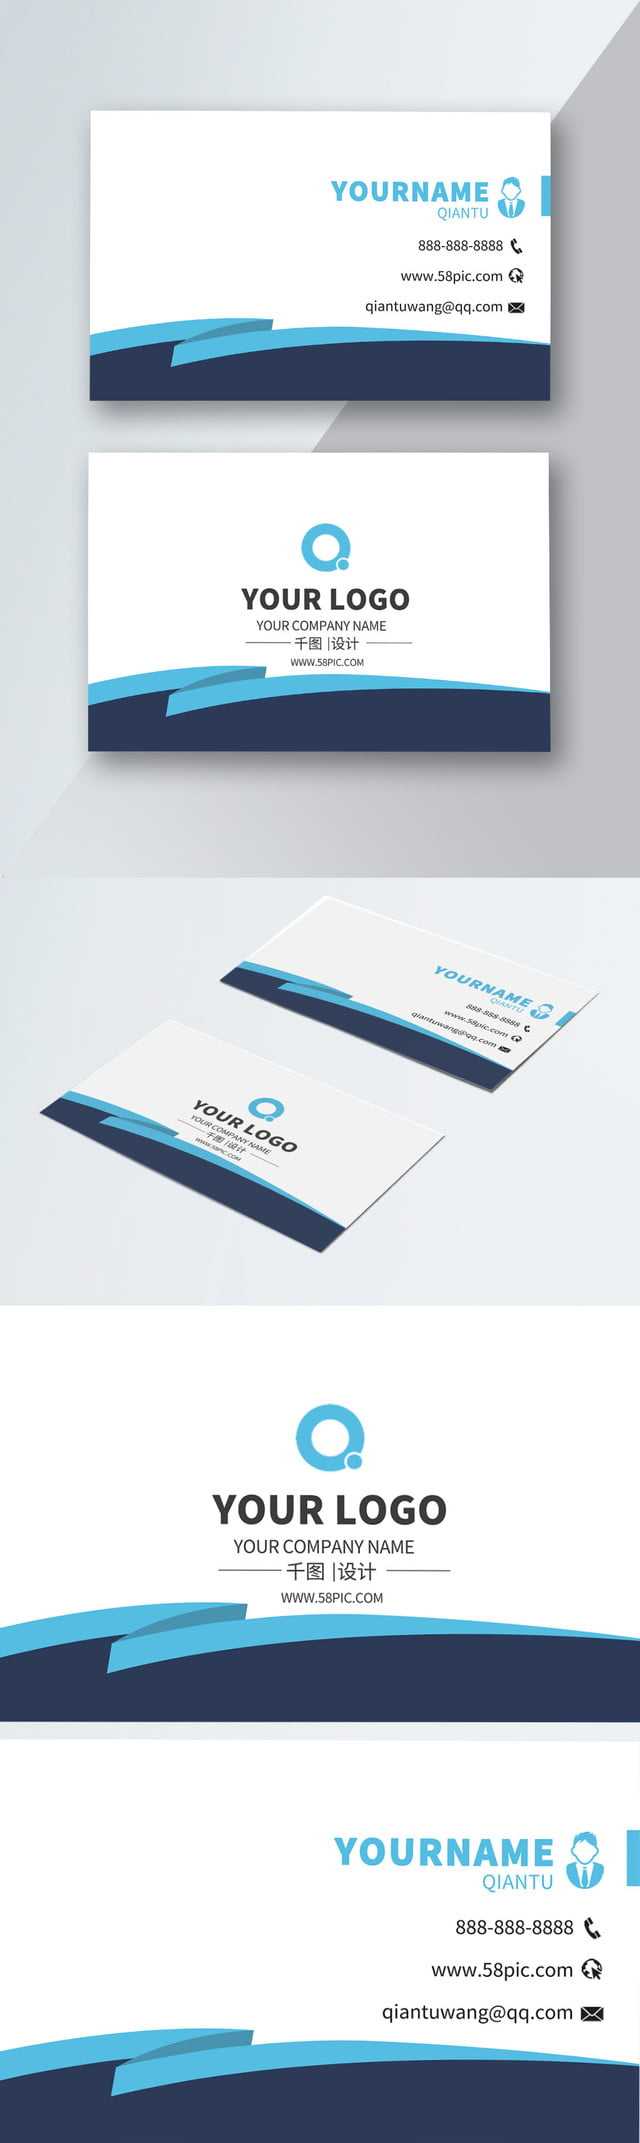 Advertising Company Business Card Material Download For Advertising Card Template